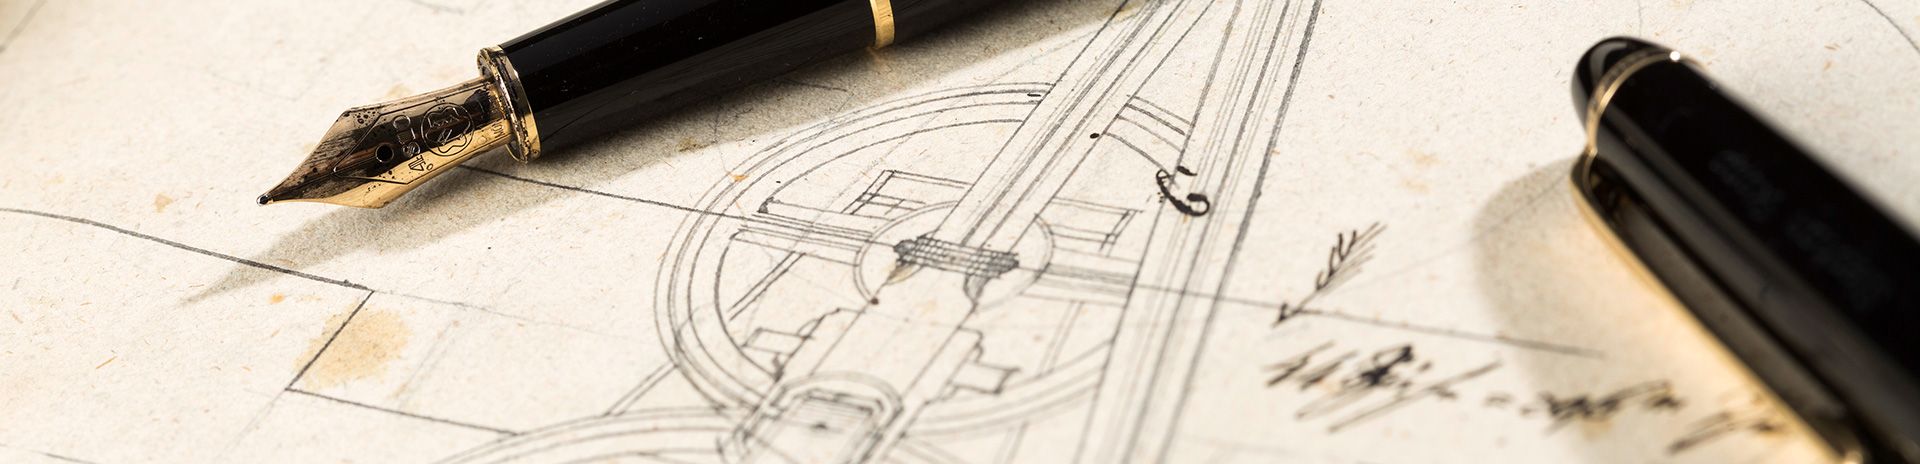 Pens laying on a technical drawing